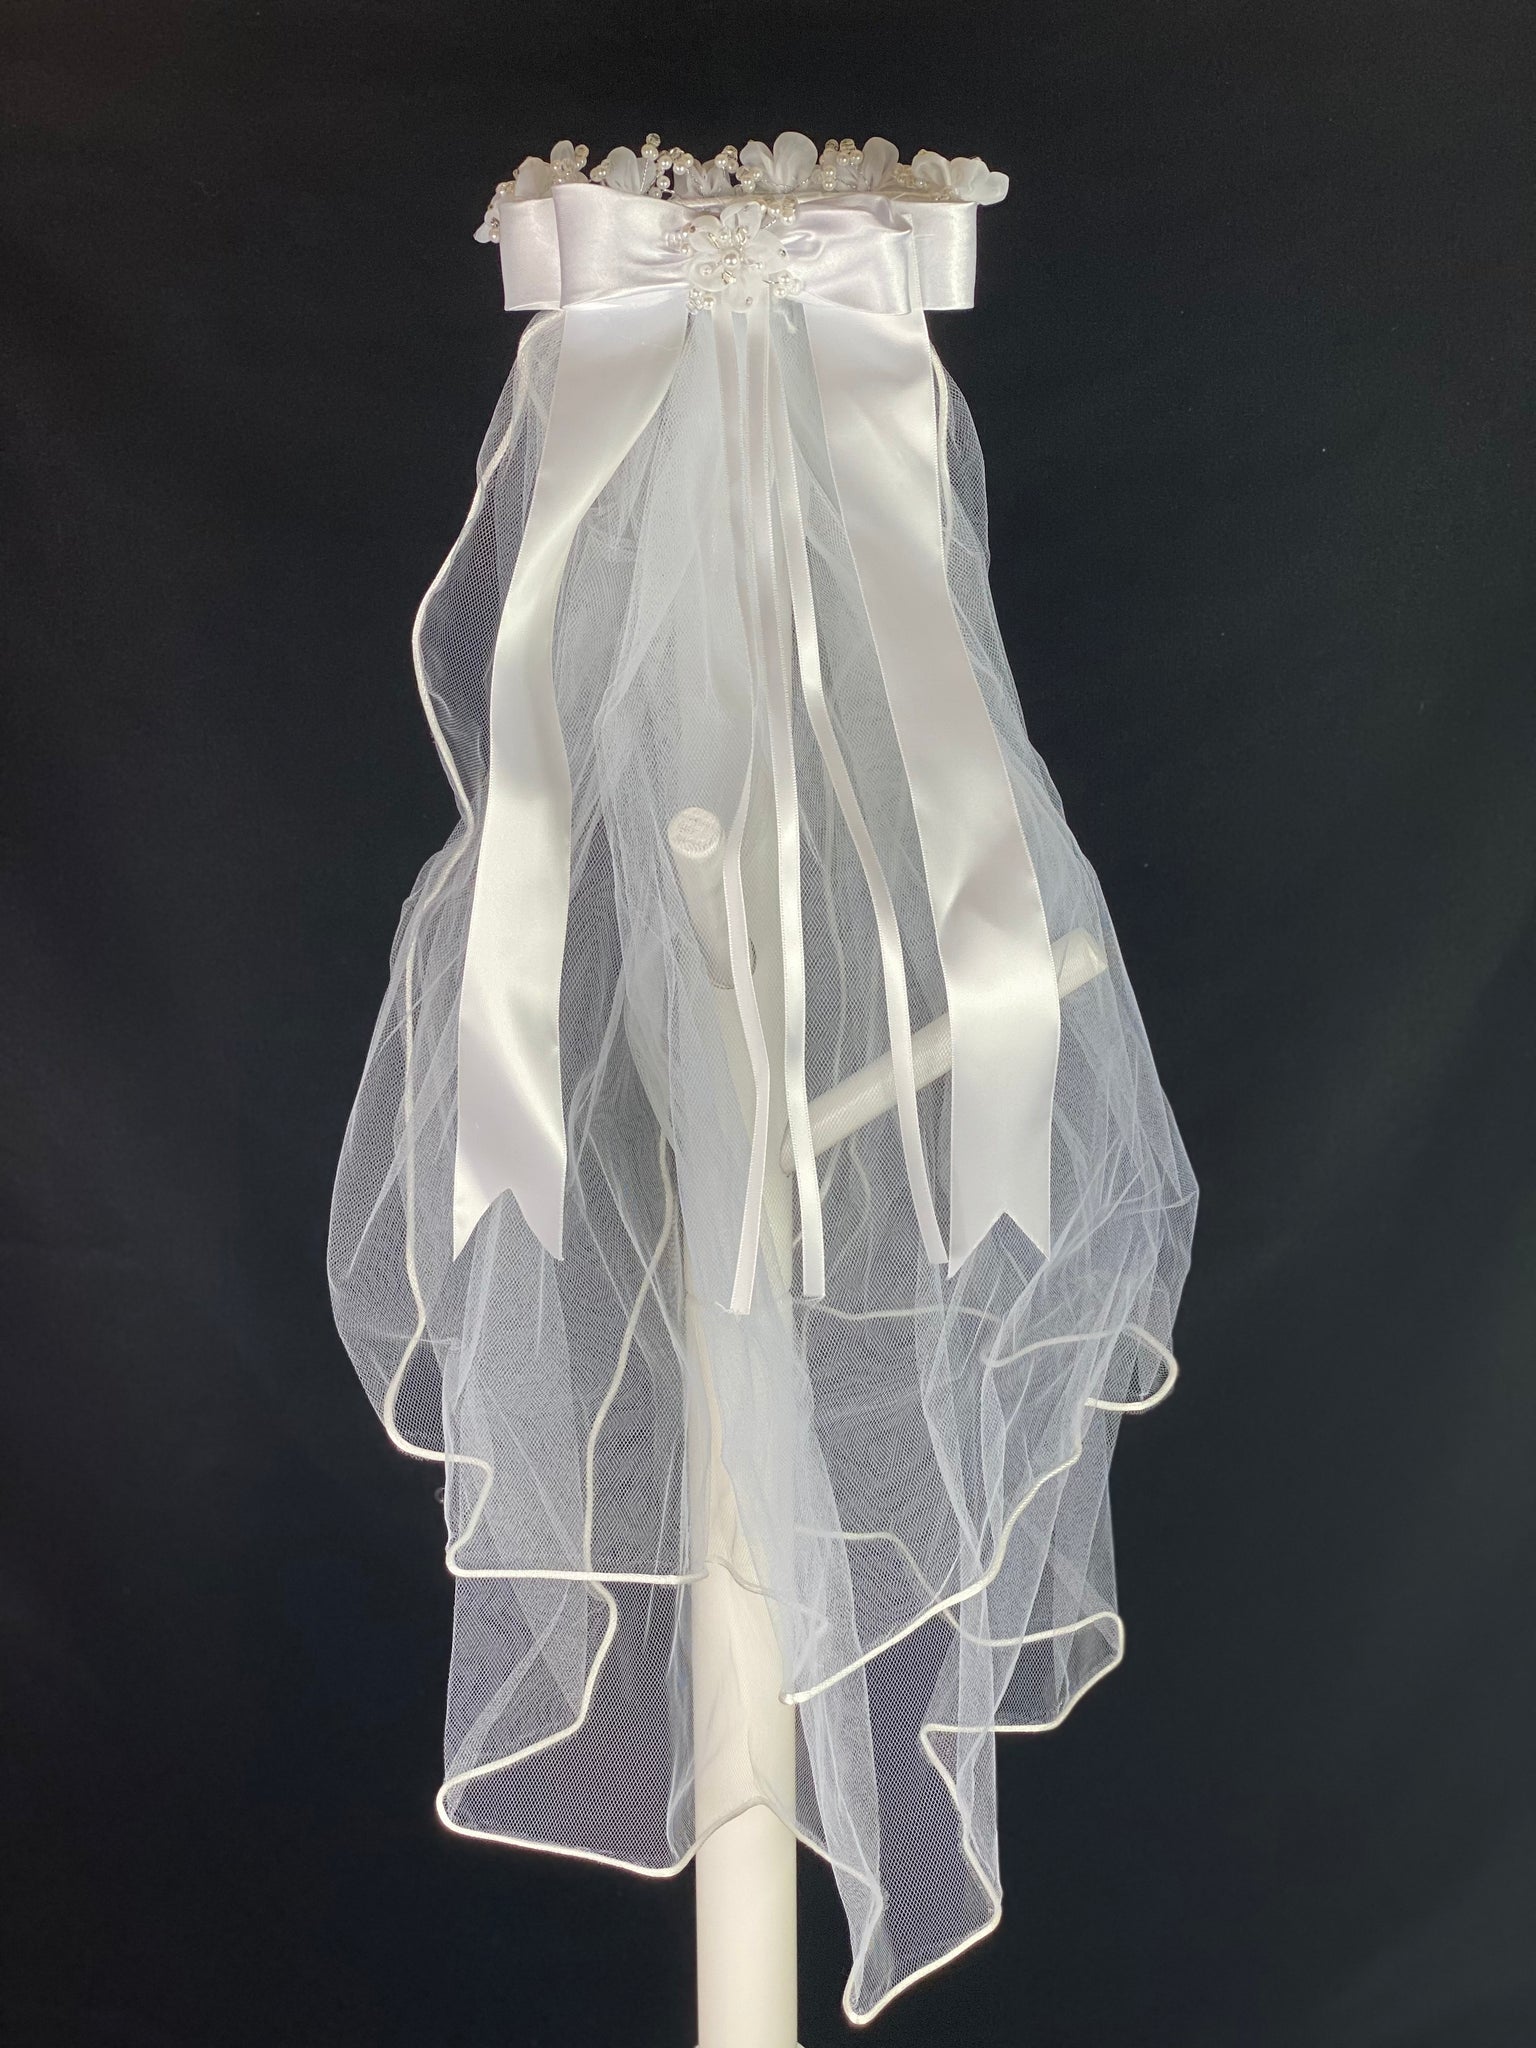 Elegant soft 2 layer tulle veil with delicate hand stitched braided satin trim around the edge and  Handmade flower halo crown with veil with large white satin bow on back. Organza flowers with sparkling rhinestone petals and pearl centers. Beautiful pearl leaves sticking out around flowers. This double layered veil reaches approximately 24" long, with a crown diameter of 6". Veil has 2" long, 3" wide, comb to secure it in place. 